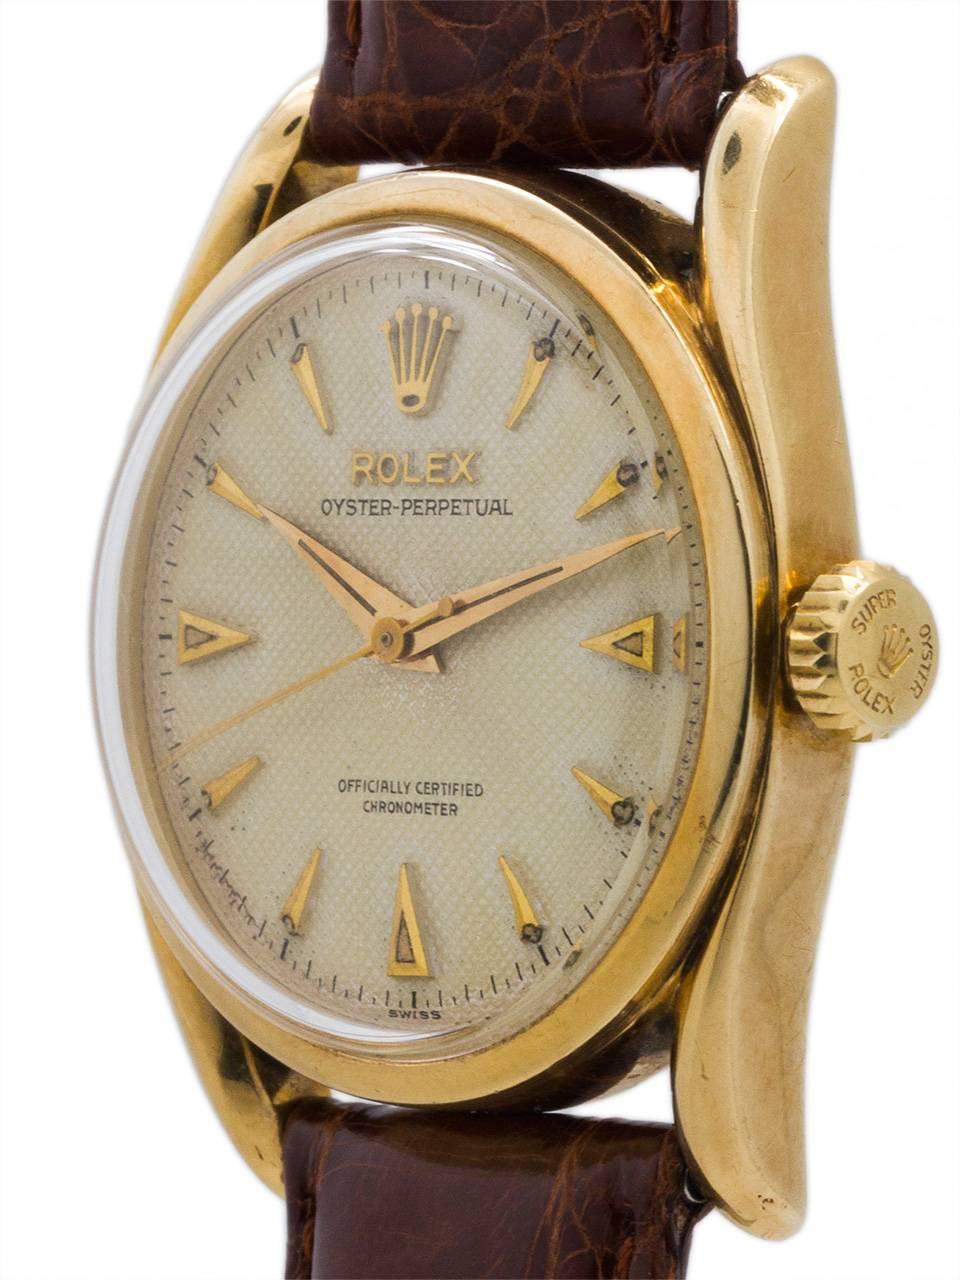 Stunning Rolex 14K YG Oyster Perpetual Bombe ref # 6092 circa 1952 with stunning original antique white waffle dial. Featuring a 35mm diameter Oyster case with bowed “bombe” style turned lugs, acrylic crystal, original “super Oyster” crown, and with